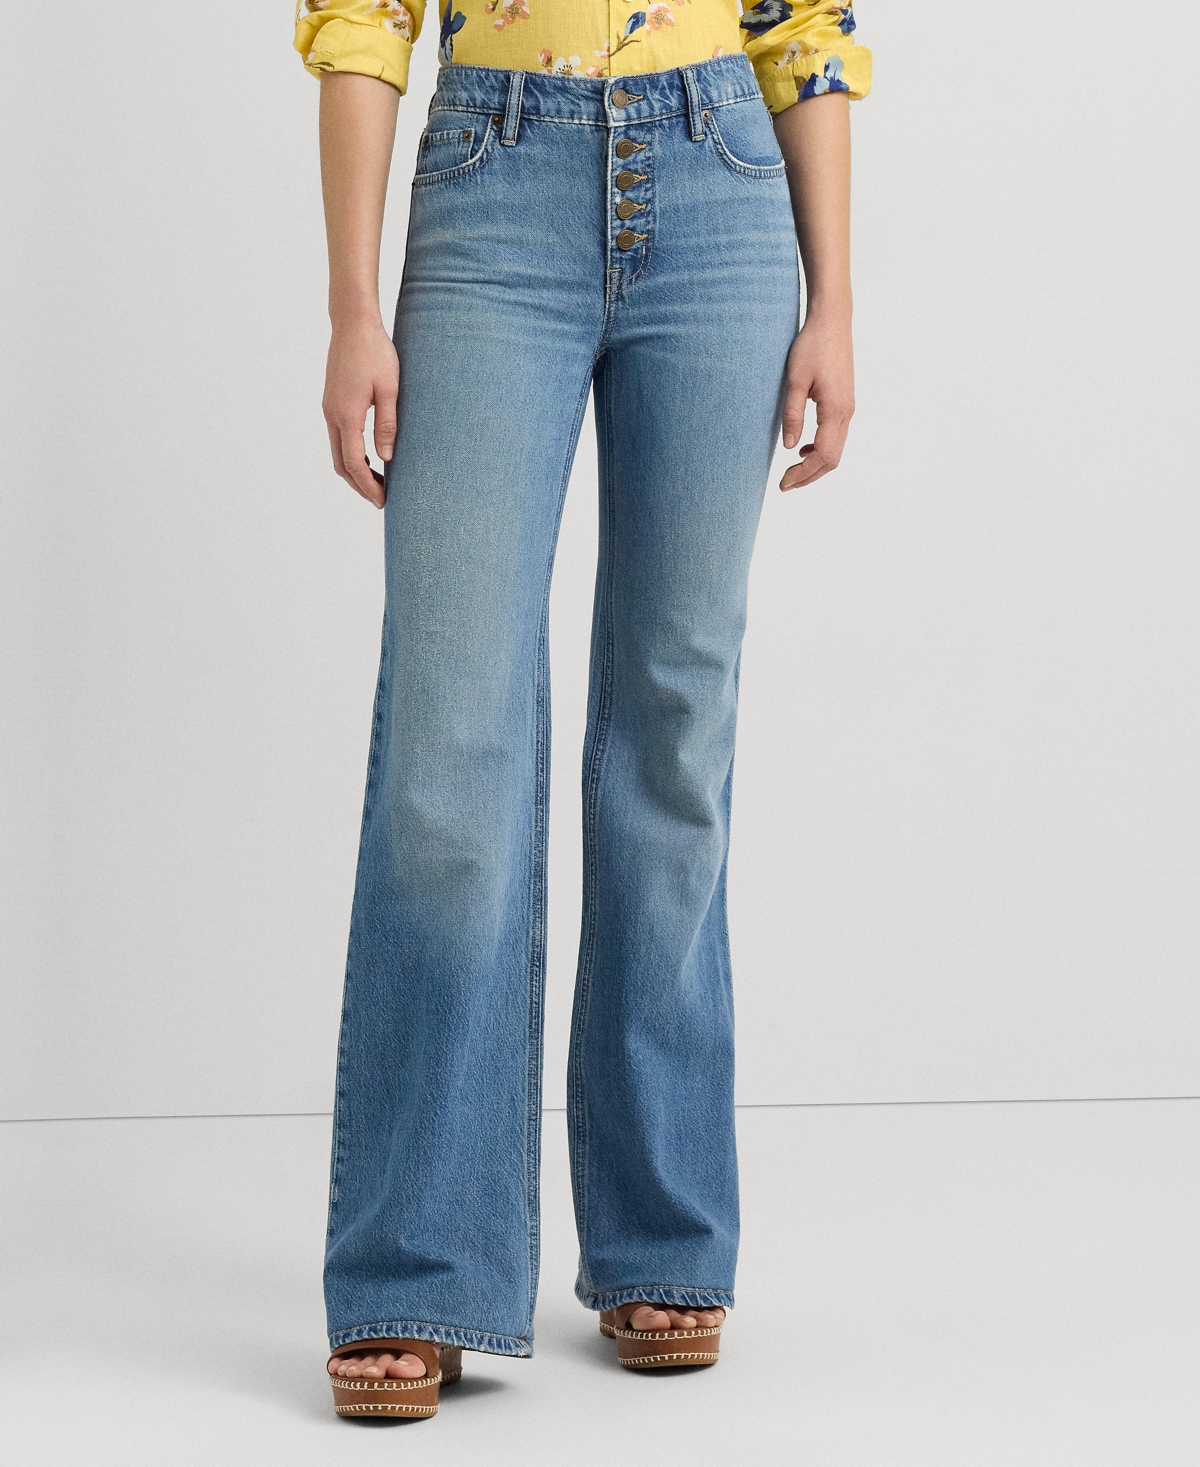 Women's High-Rise Flare Jeans - Blue Wash